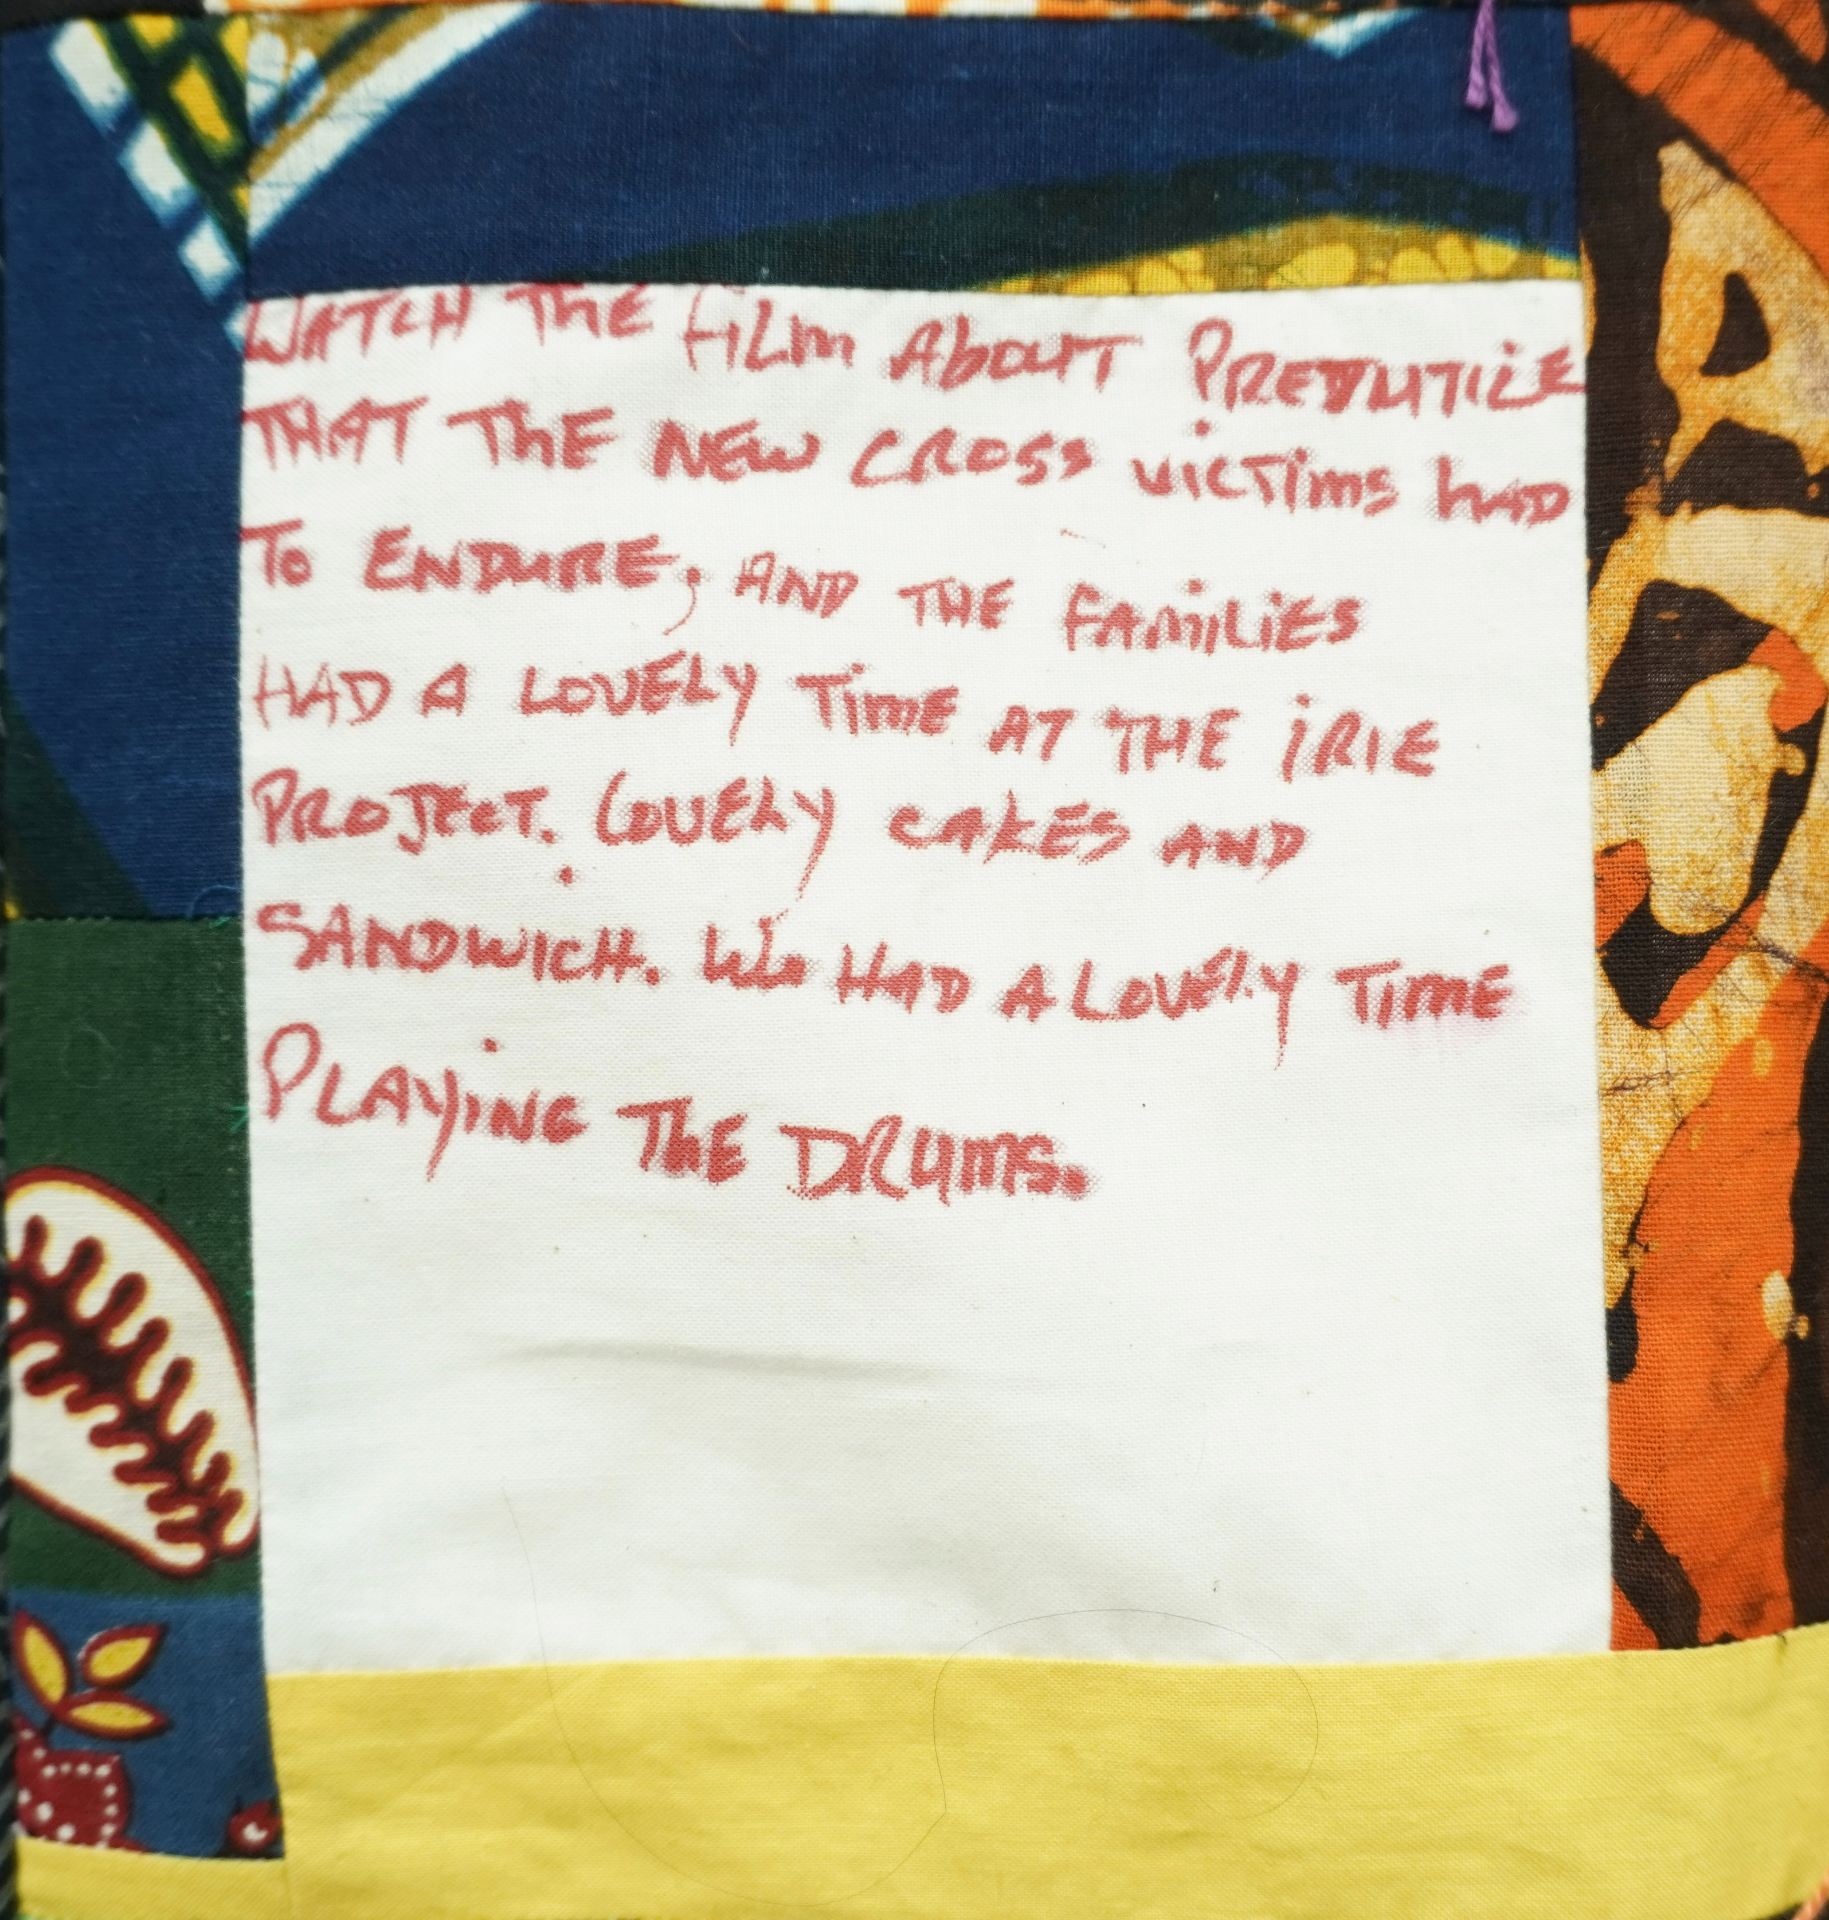 Commemorative quilt. Text reads, 'Watch the film about prejudice that the New Cross victims had to endure. And the families. Had a lovely time at the IRIE project, lovely cakes and sandwiches. We had a lovely time playing the drums'